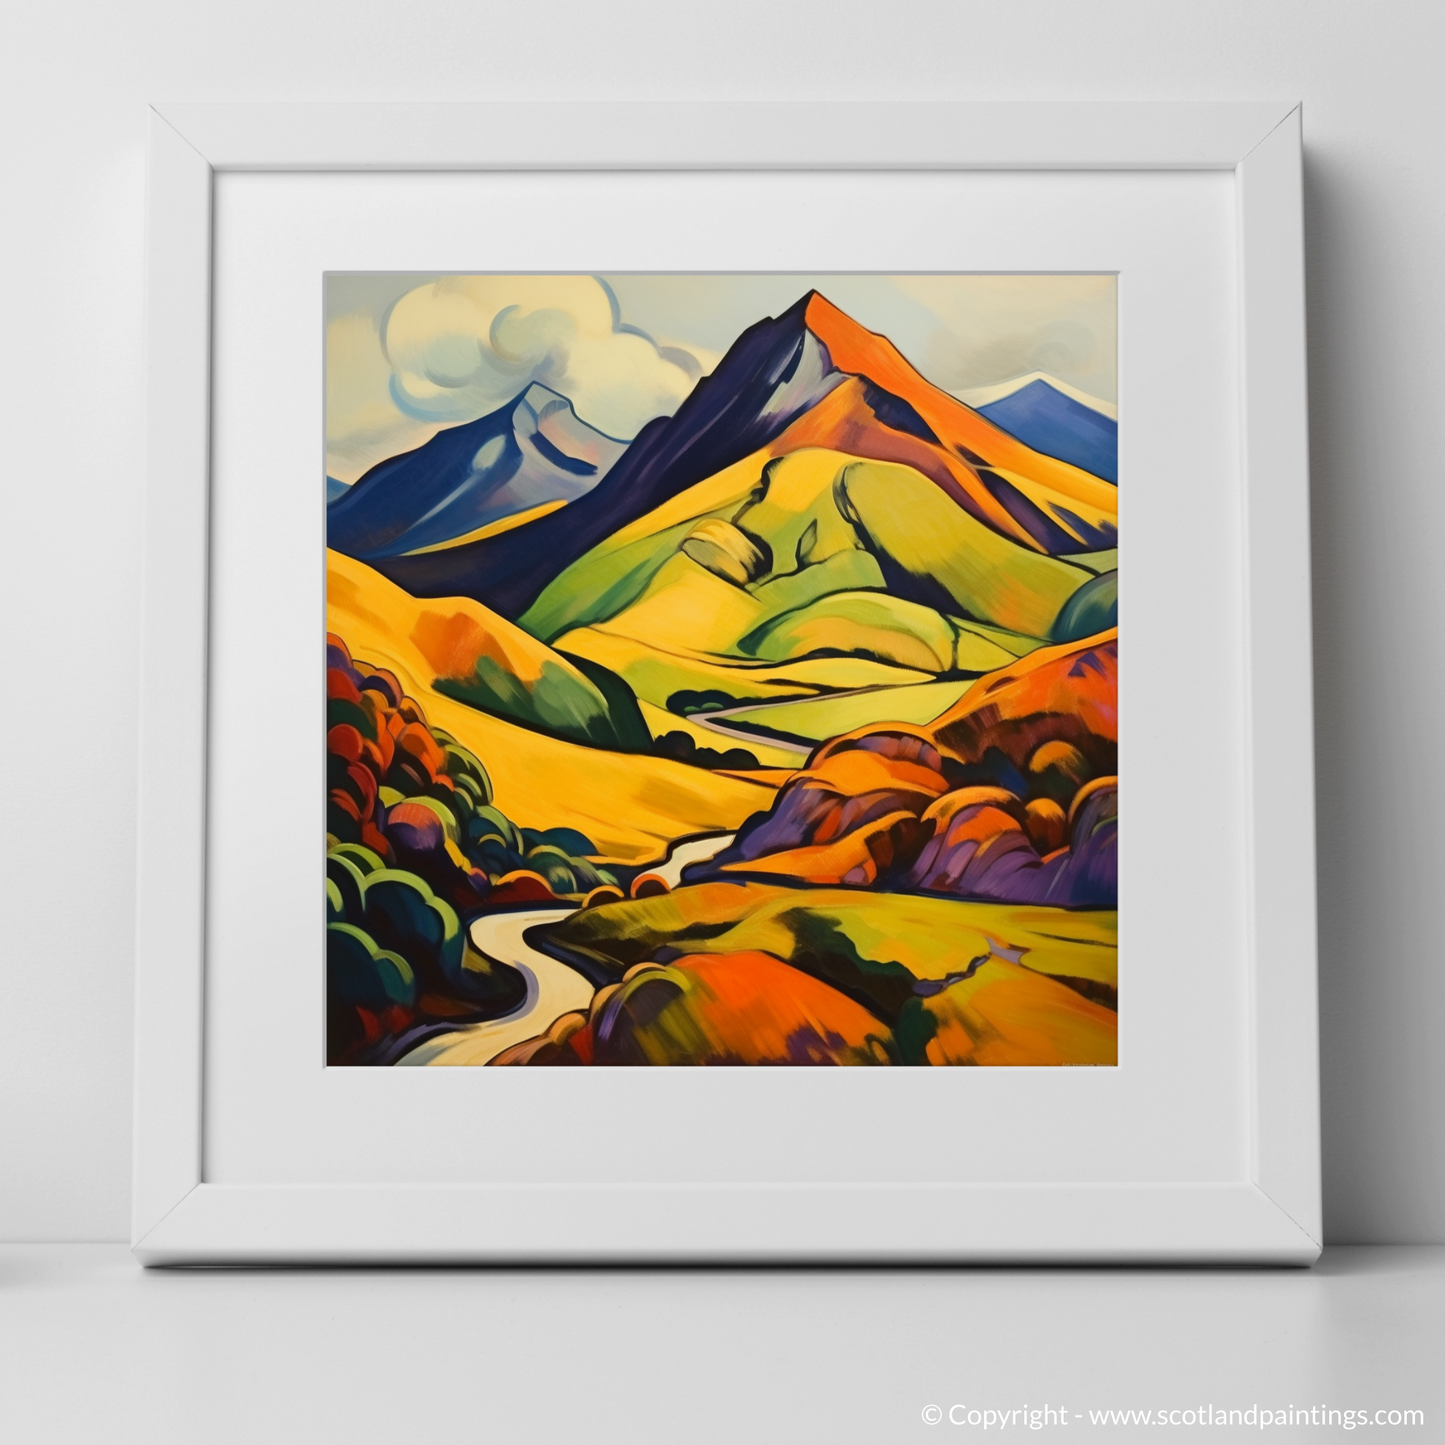 Vibrant Highland Dream: A Fauvist Ode to Meall a' Choire Lèith